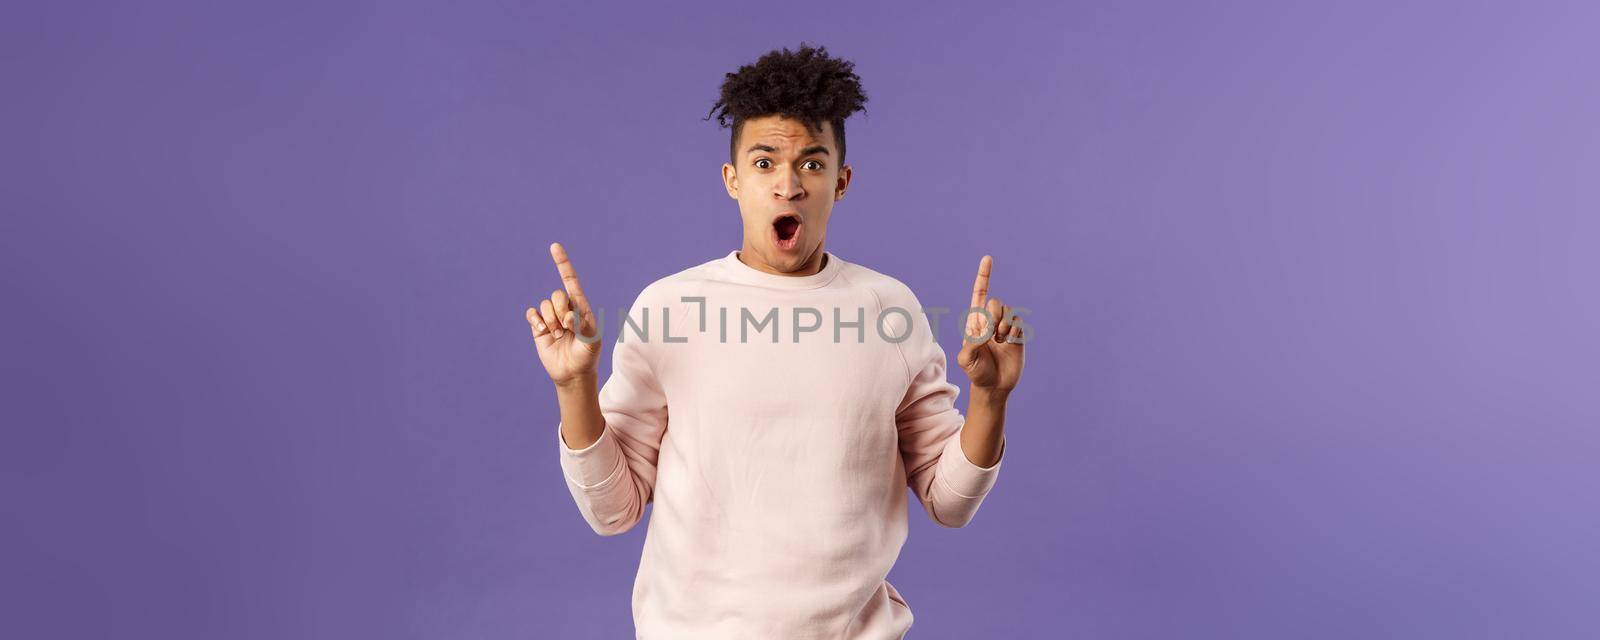 Portrait of shocked, speechless young hispanic man with dreads reacting to overwhelming shook news, gasping, drop jaw and staring concerned as pointing up at something astounding by Benzoix